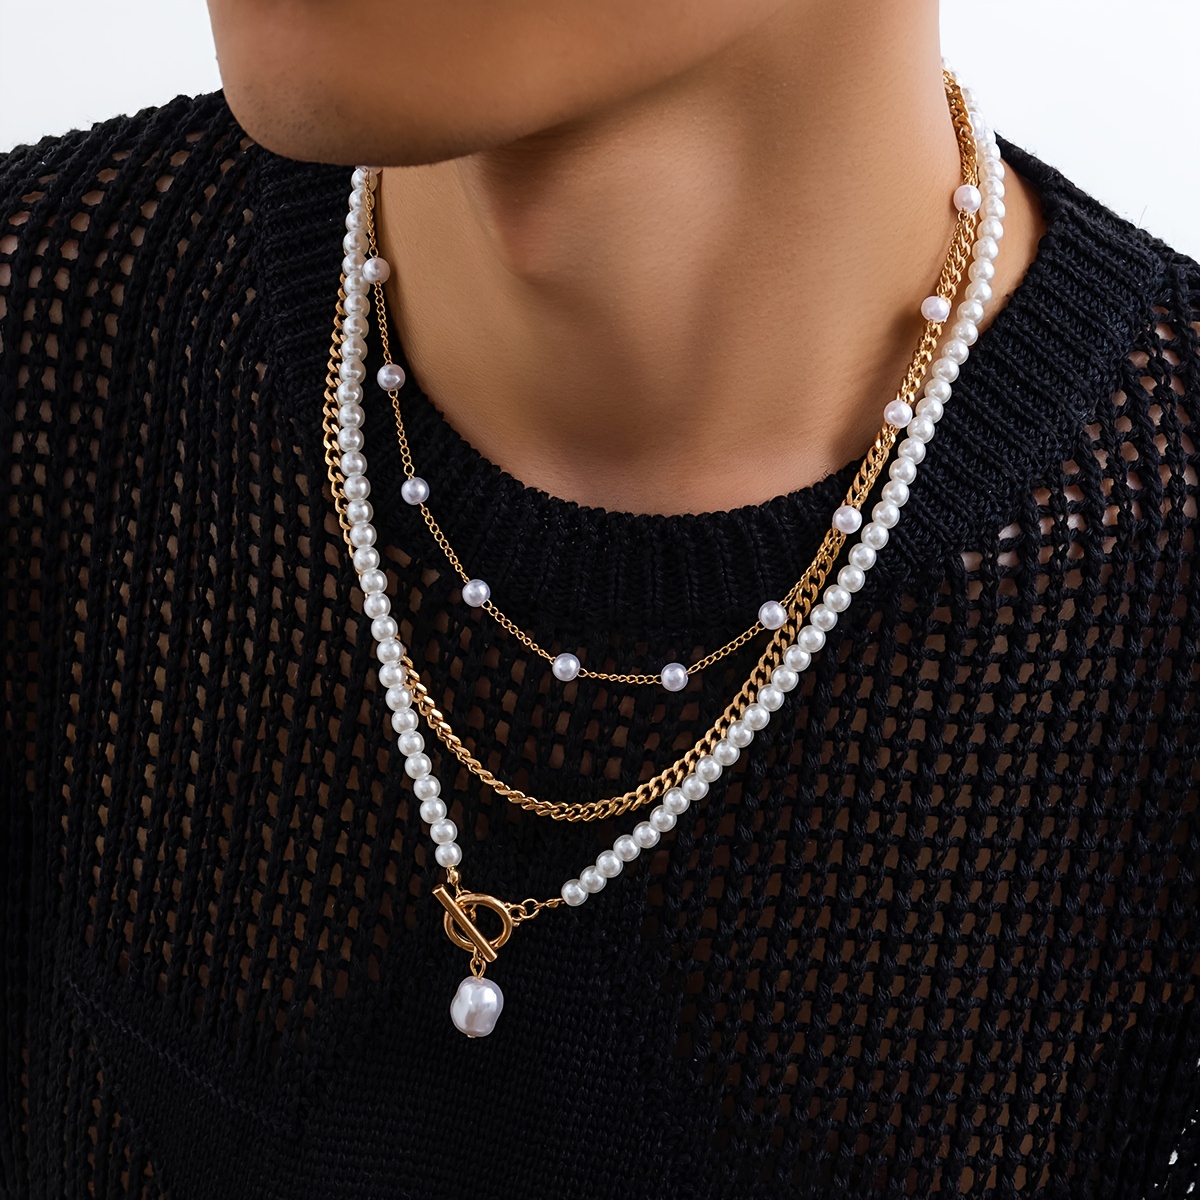 Buy Layer Gift Choker Imitation Pearl Necklace Men Clavicle Chain